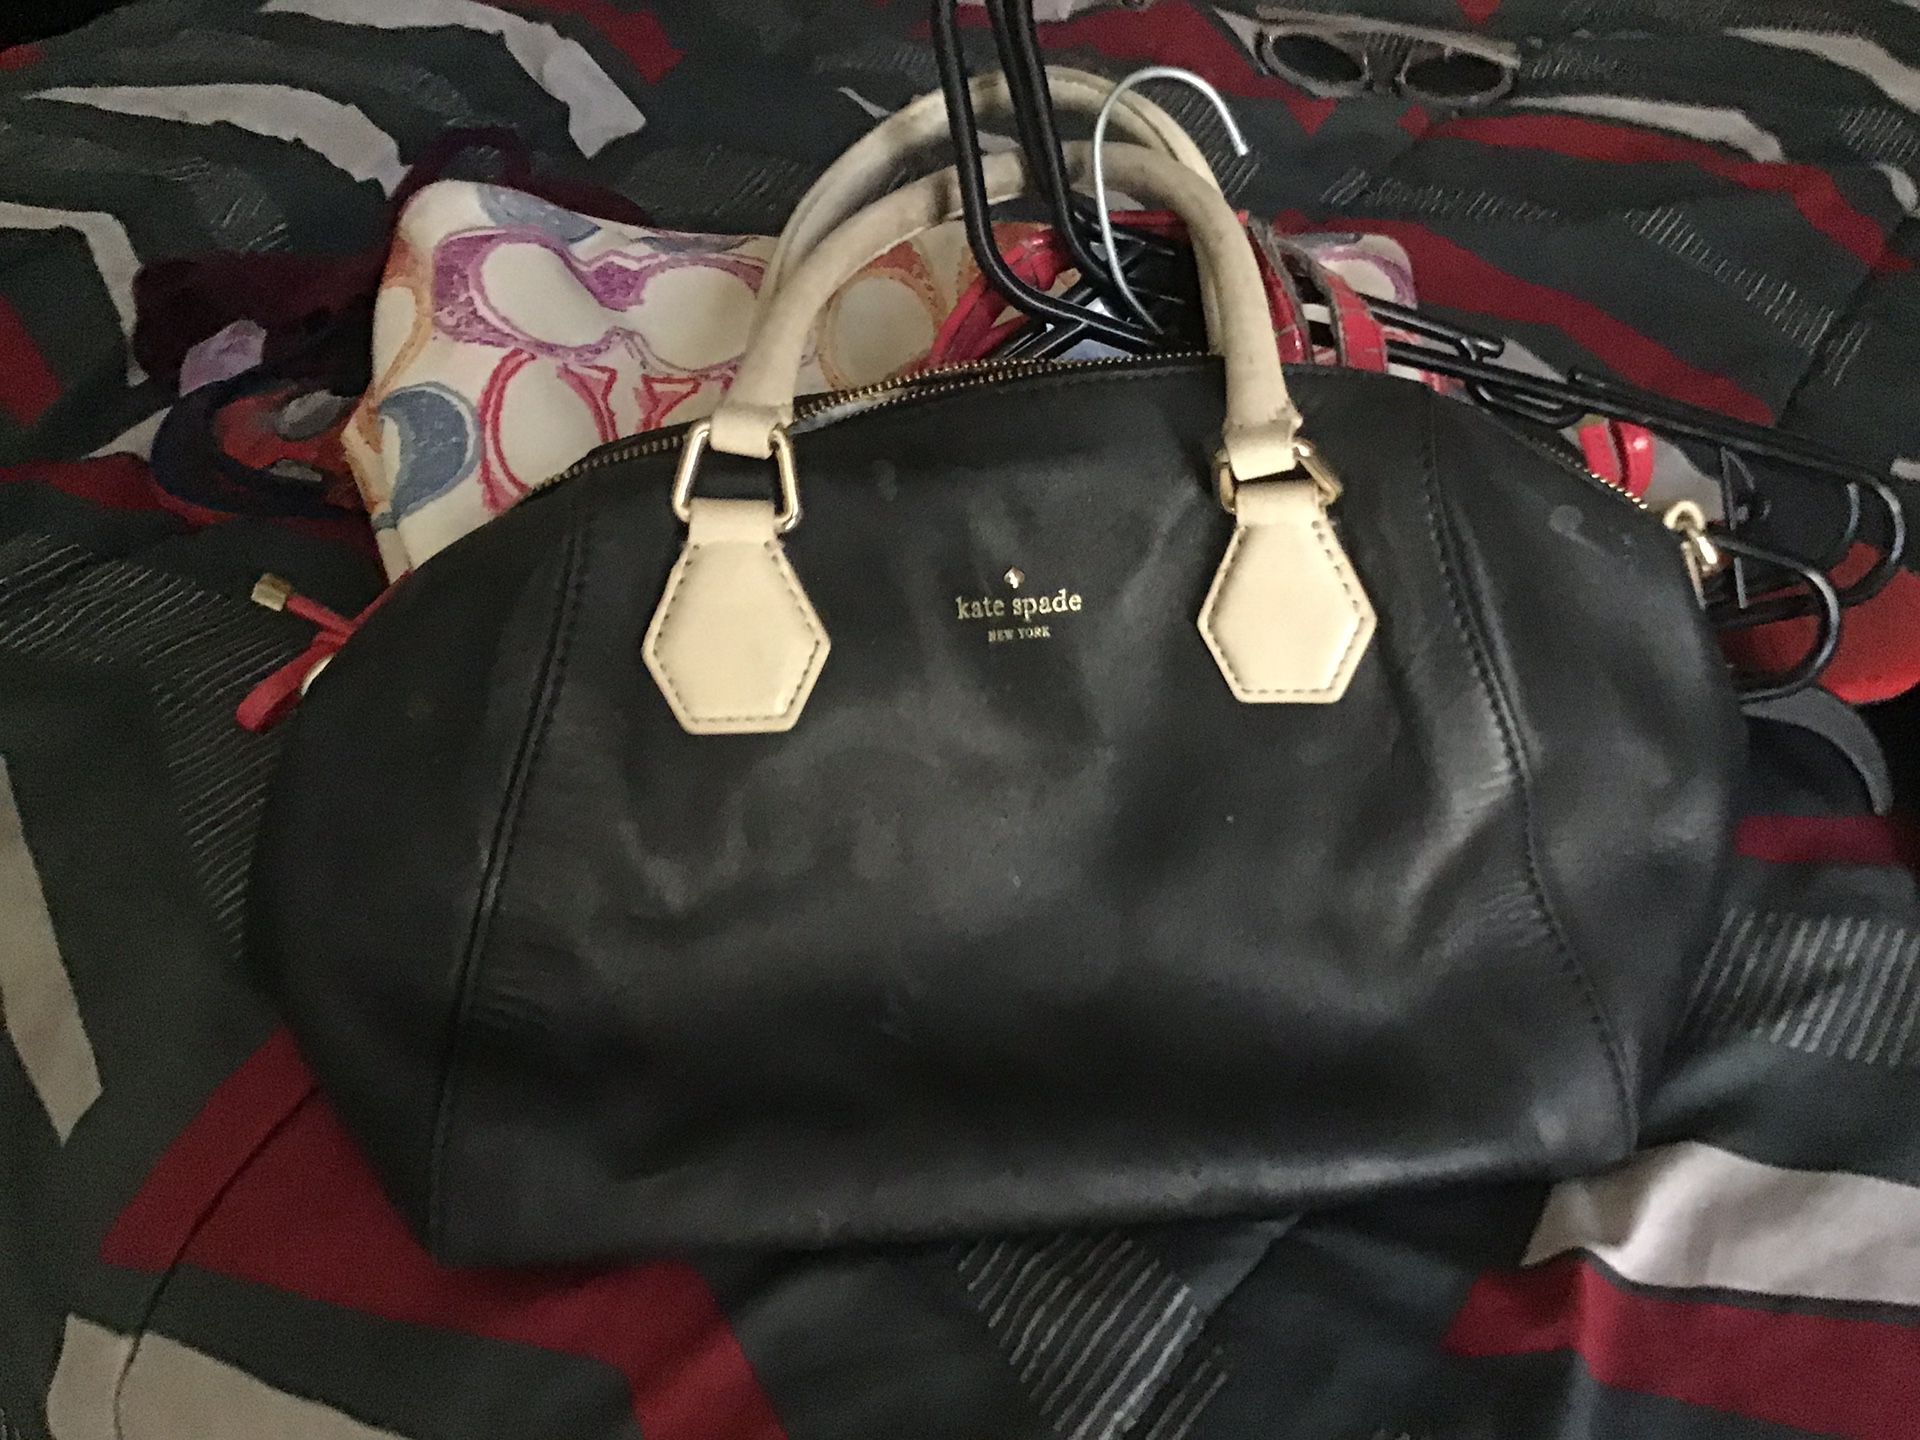 *SALE TODAY ONLY * Kate spade purse